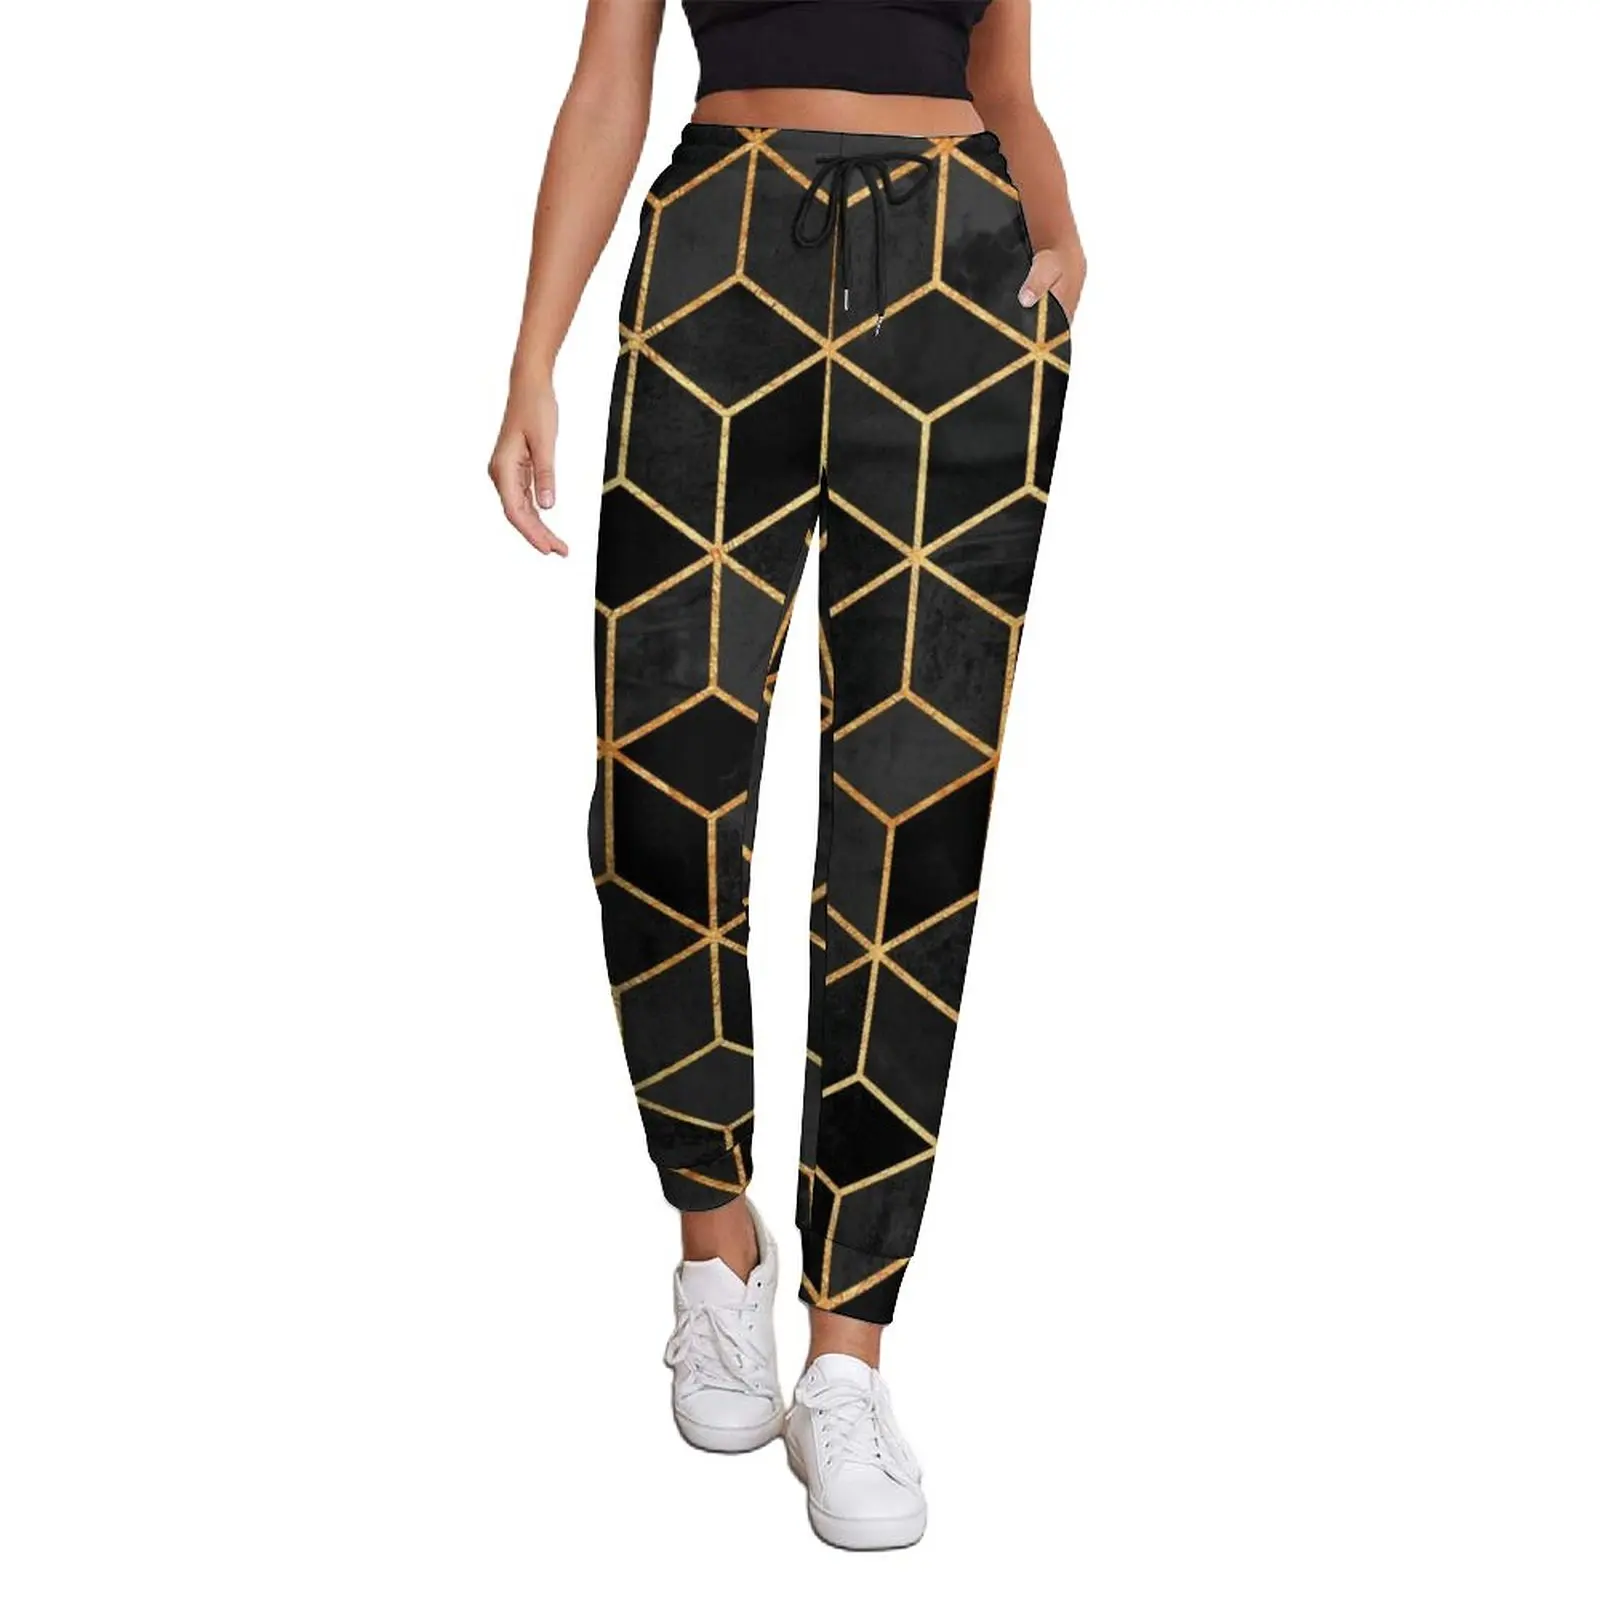 

Gold Geo Print Jogger Pants Black Cubes Street Style Sweatpants Autumn Ladies Casual Printed Big Size Trousers Gift